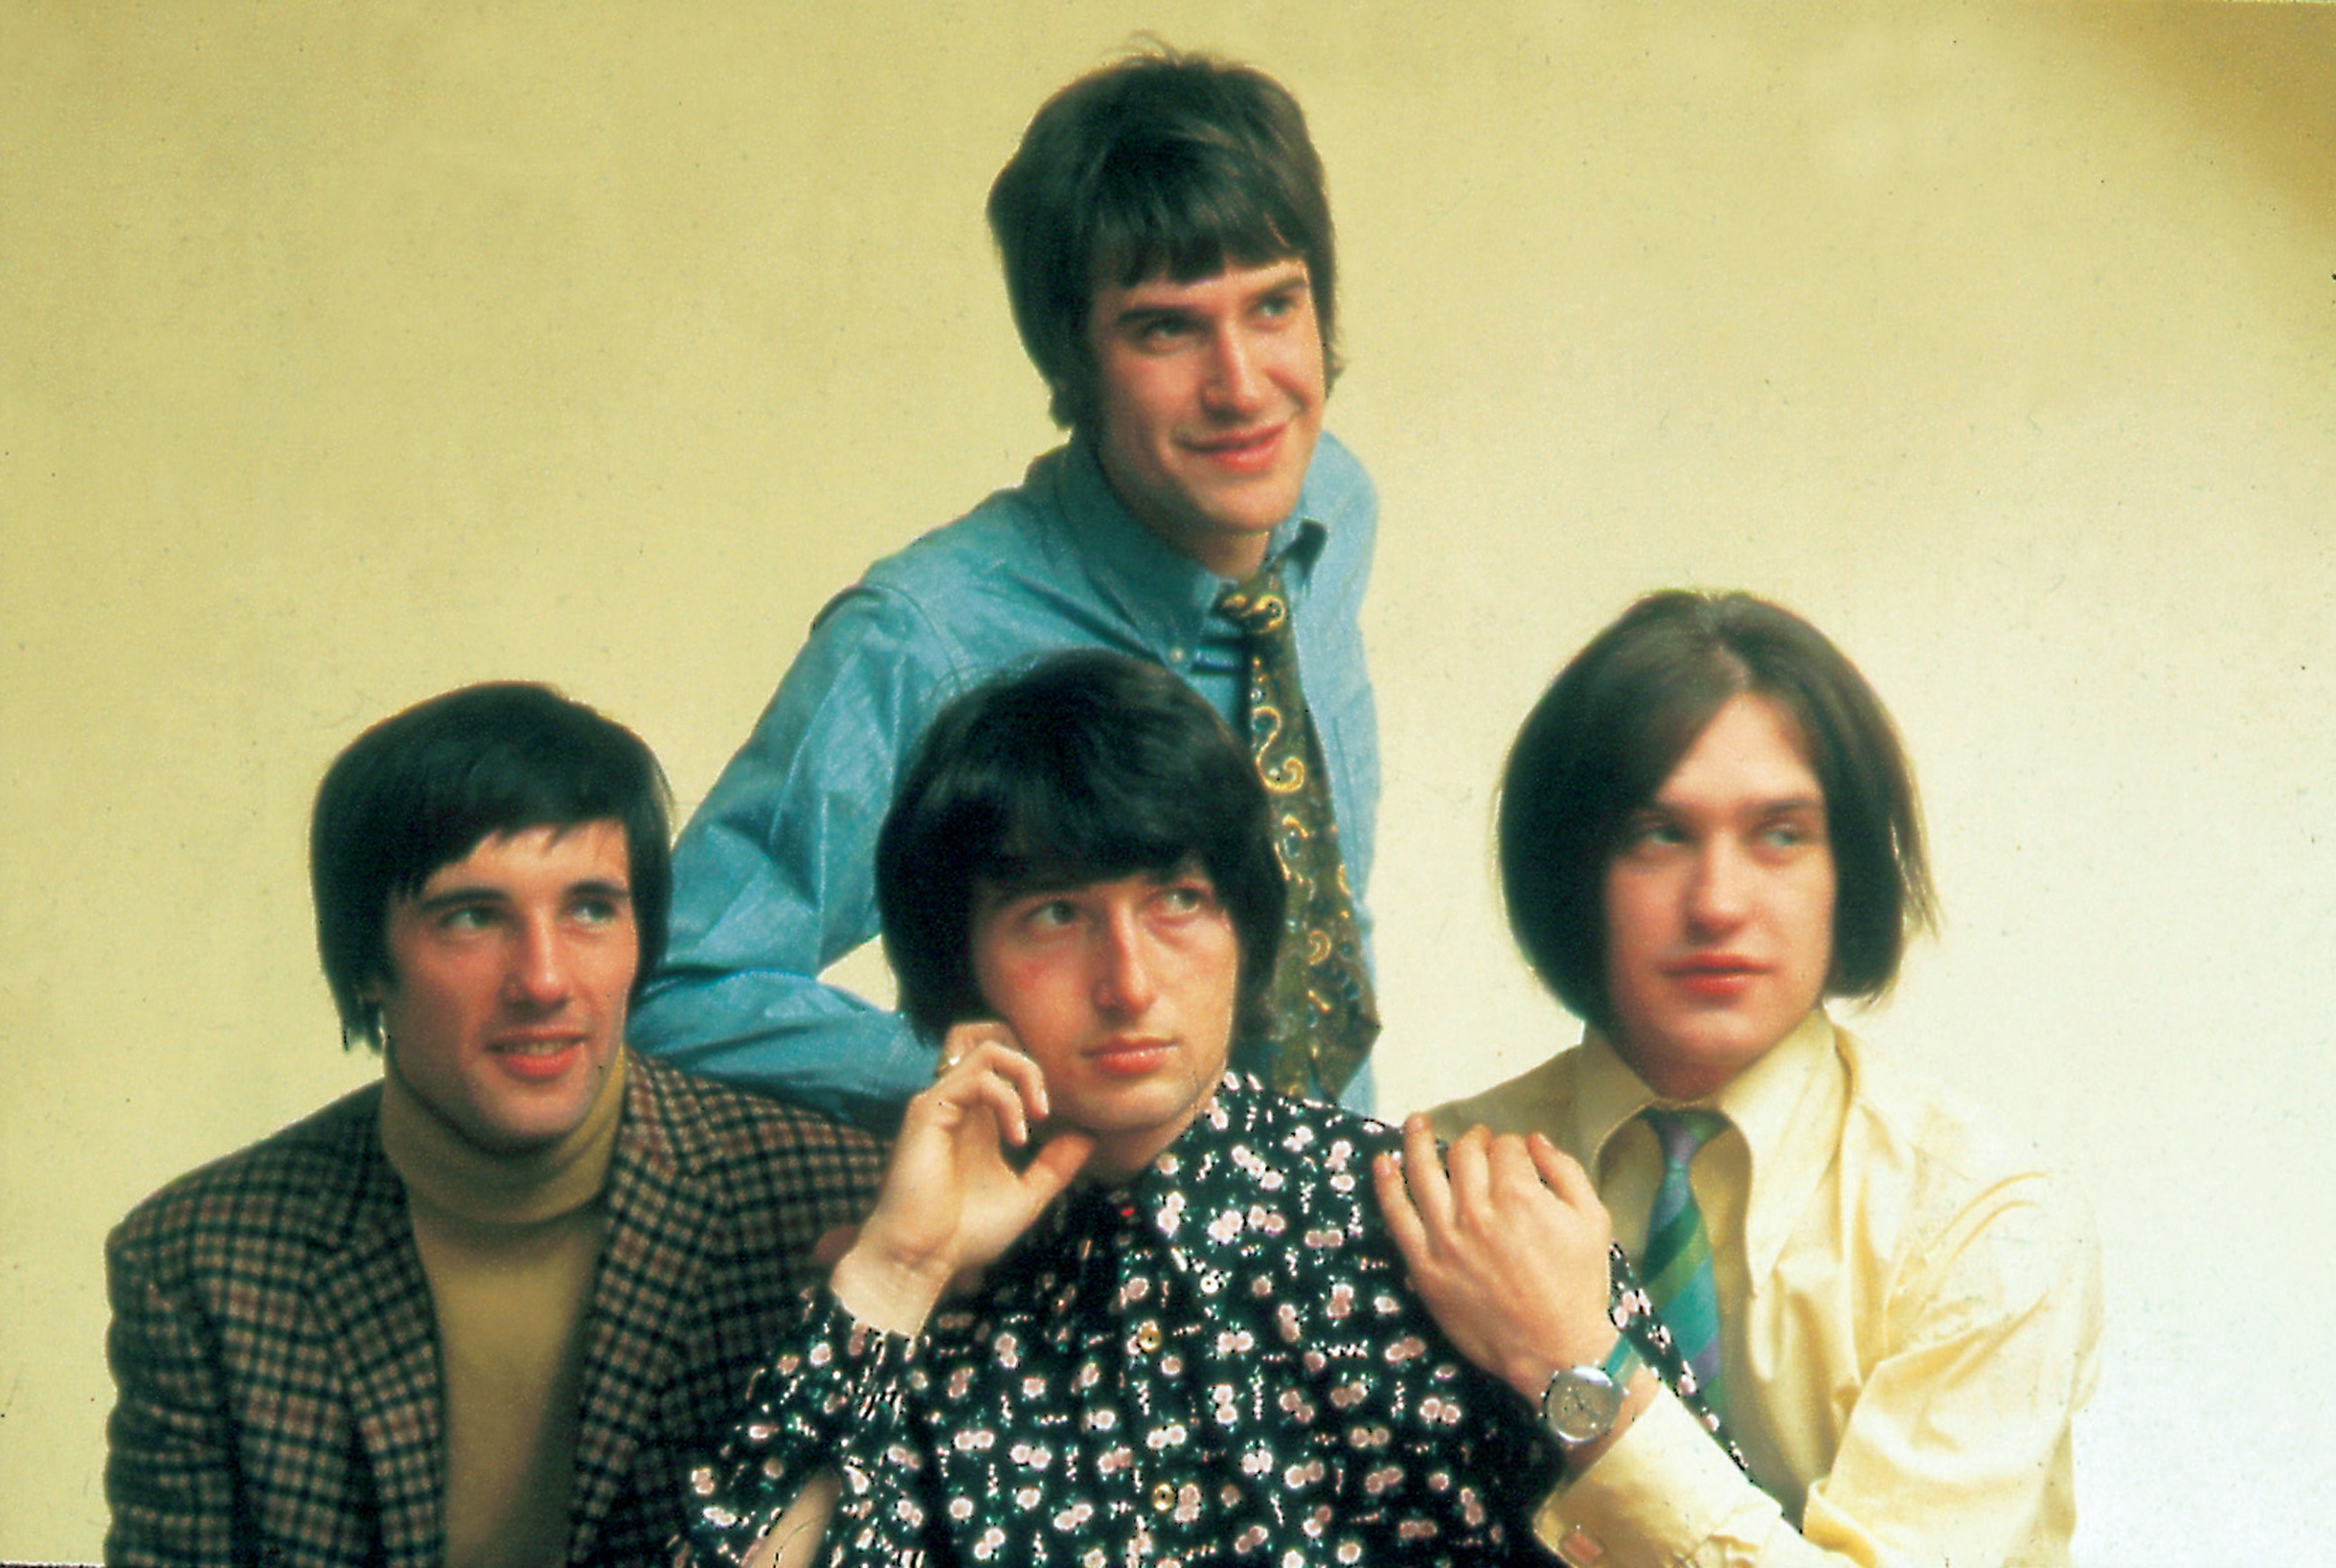 The Kinks are taking fans on a new 'Journey' with latest compilations -  cleveland.com